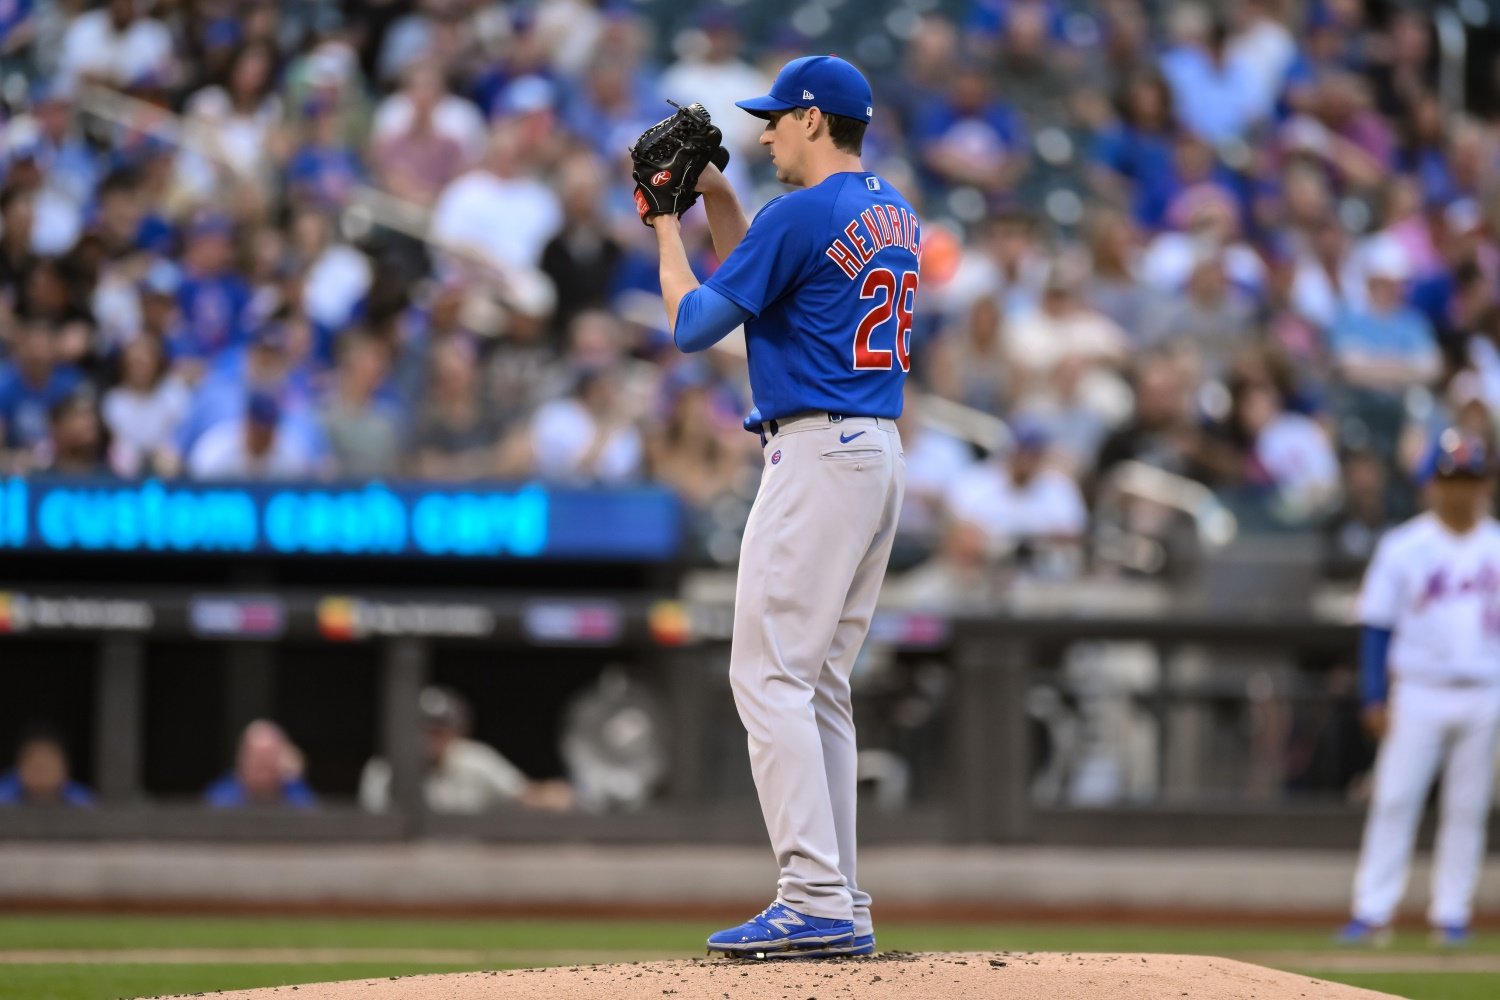 Let's Talk About the Cubs' Options With Regard to Kyle Hendricks